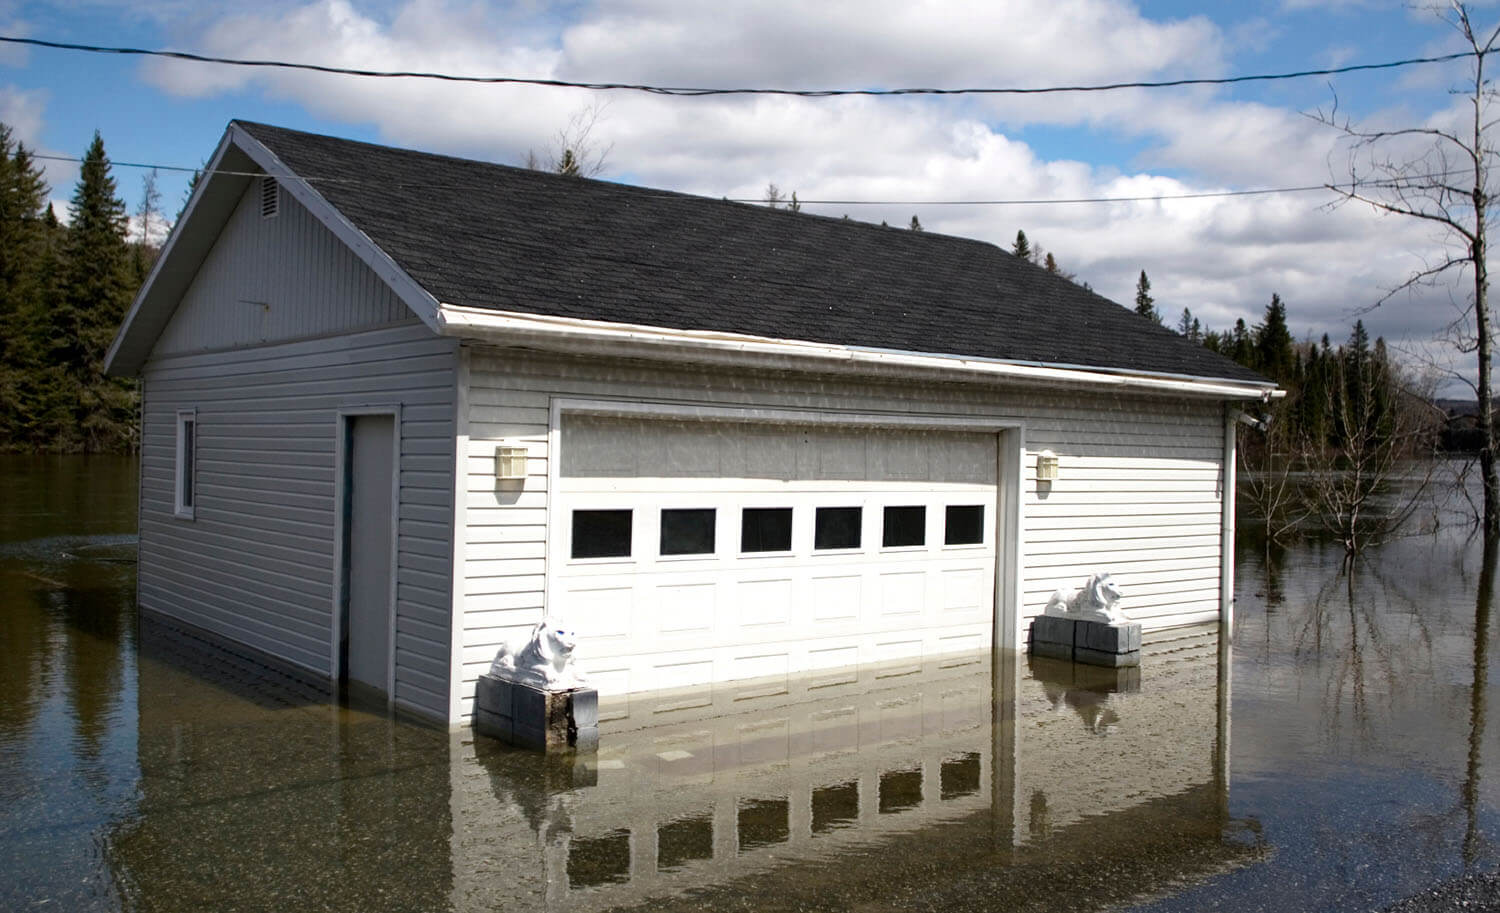 flooding due to rising rivers, engulfing a garage in knee high water